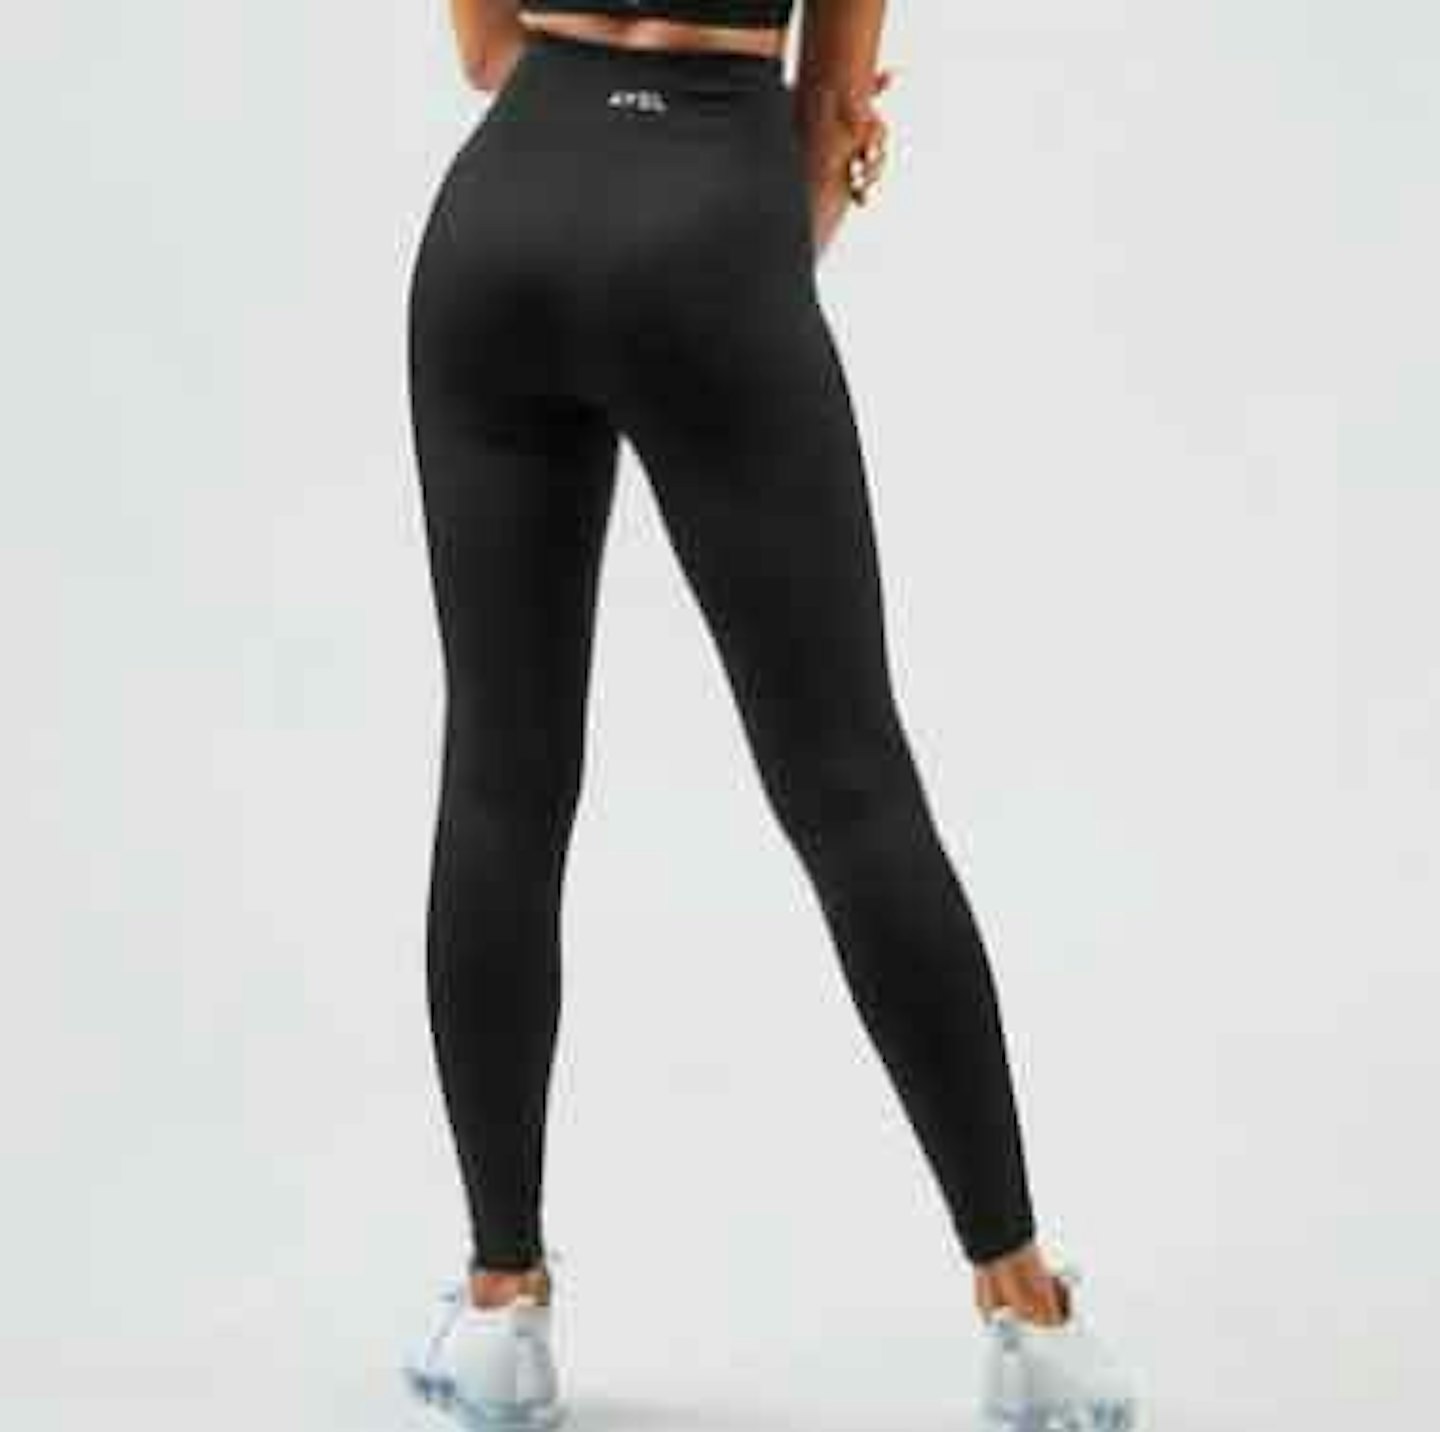 Black yoga pants: 11 of the top-rated pairs on the internet 2022